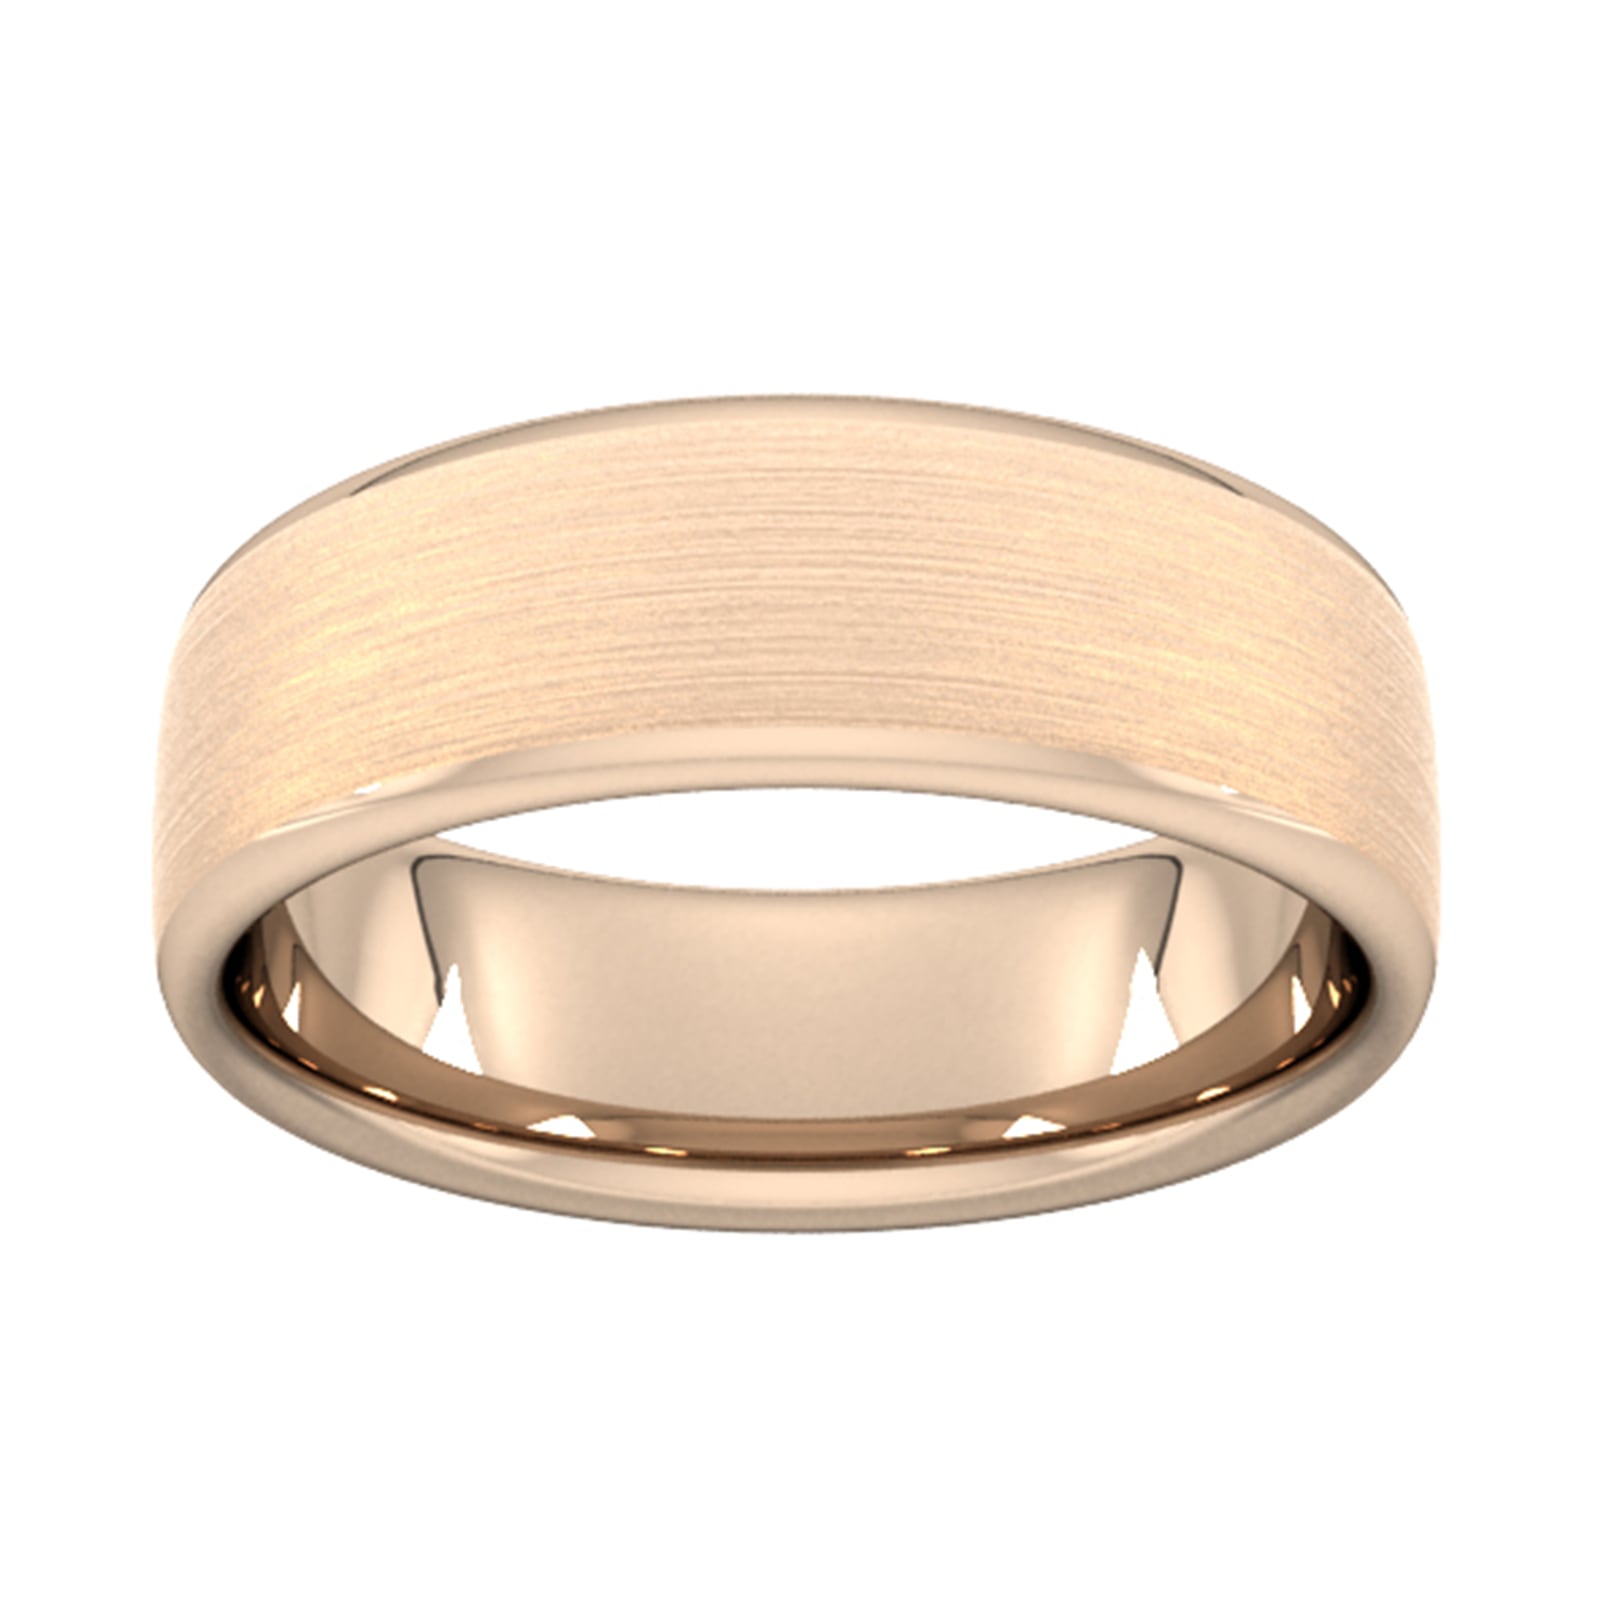 7mm Flat Court Heavy Matt Finished Wedding Ring In 18 Carat Rose Gold - Ring Size S